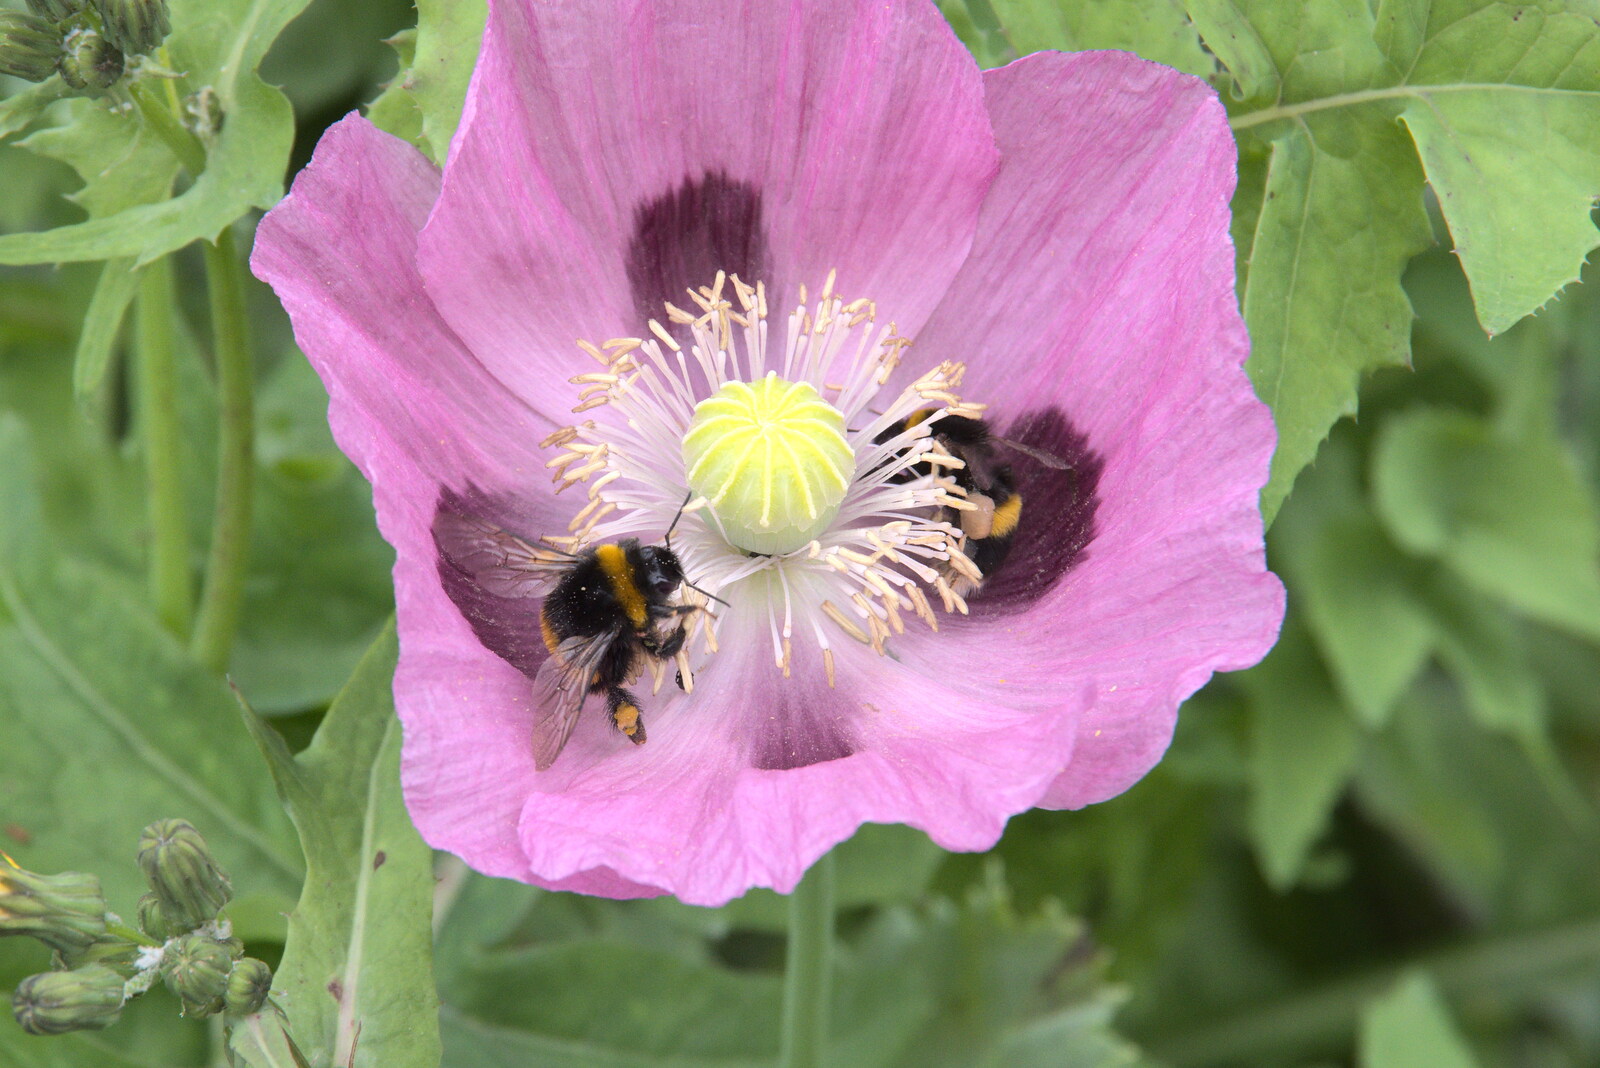 The bees are enjoying the poppies from Planting a Tree, Town Moors, Eye, Suffolk - 10th July 2021